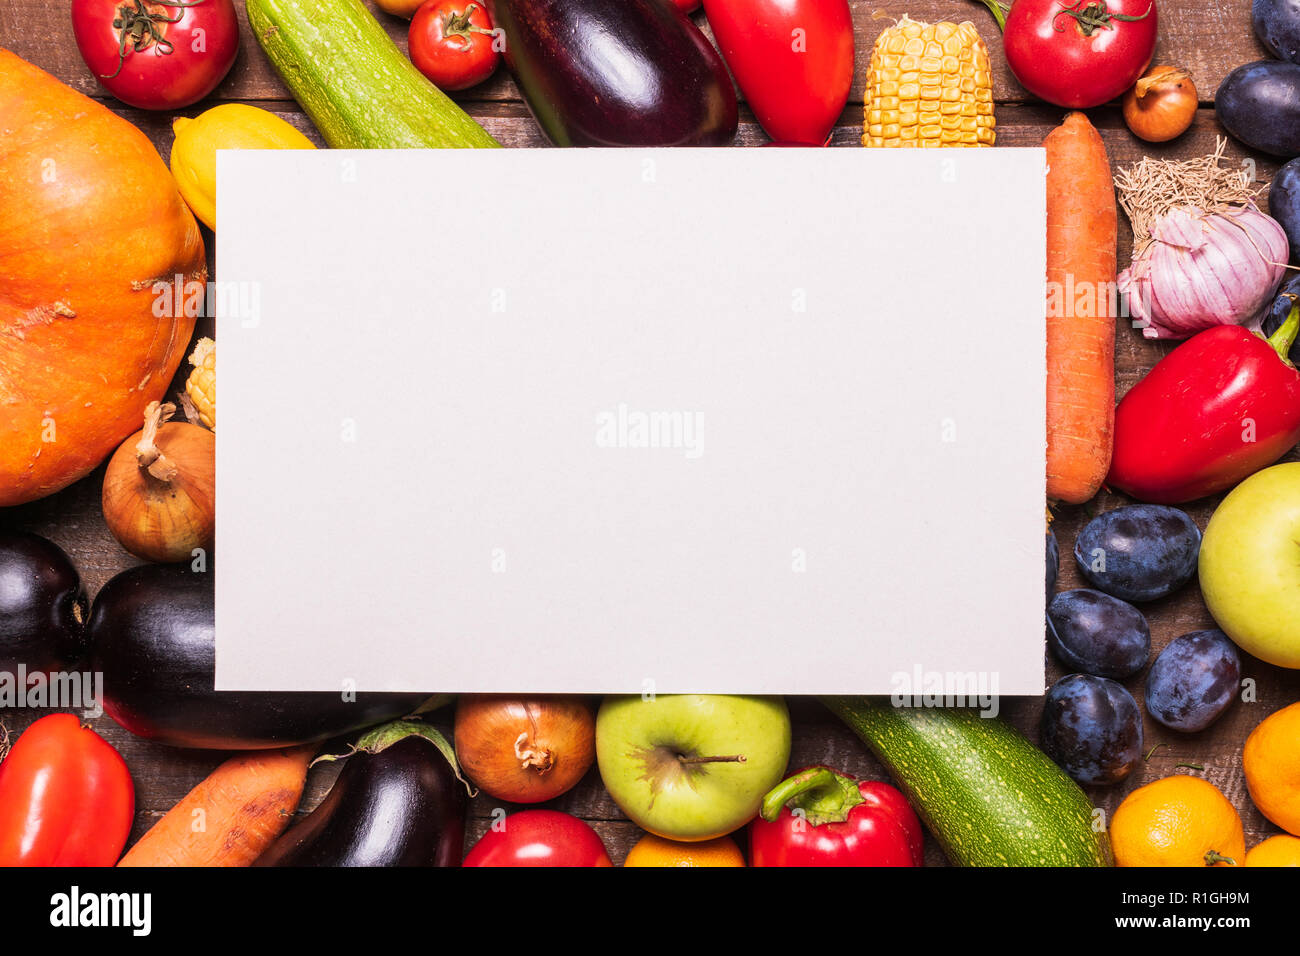 Download Food Concept Mockup Flat Lay View Of Layout Made Of Various Vegetables And Fruits And White Paper Card For Text Stock Photo Alamy